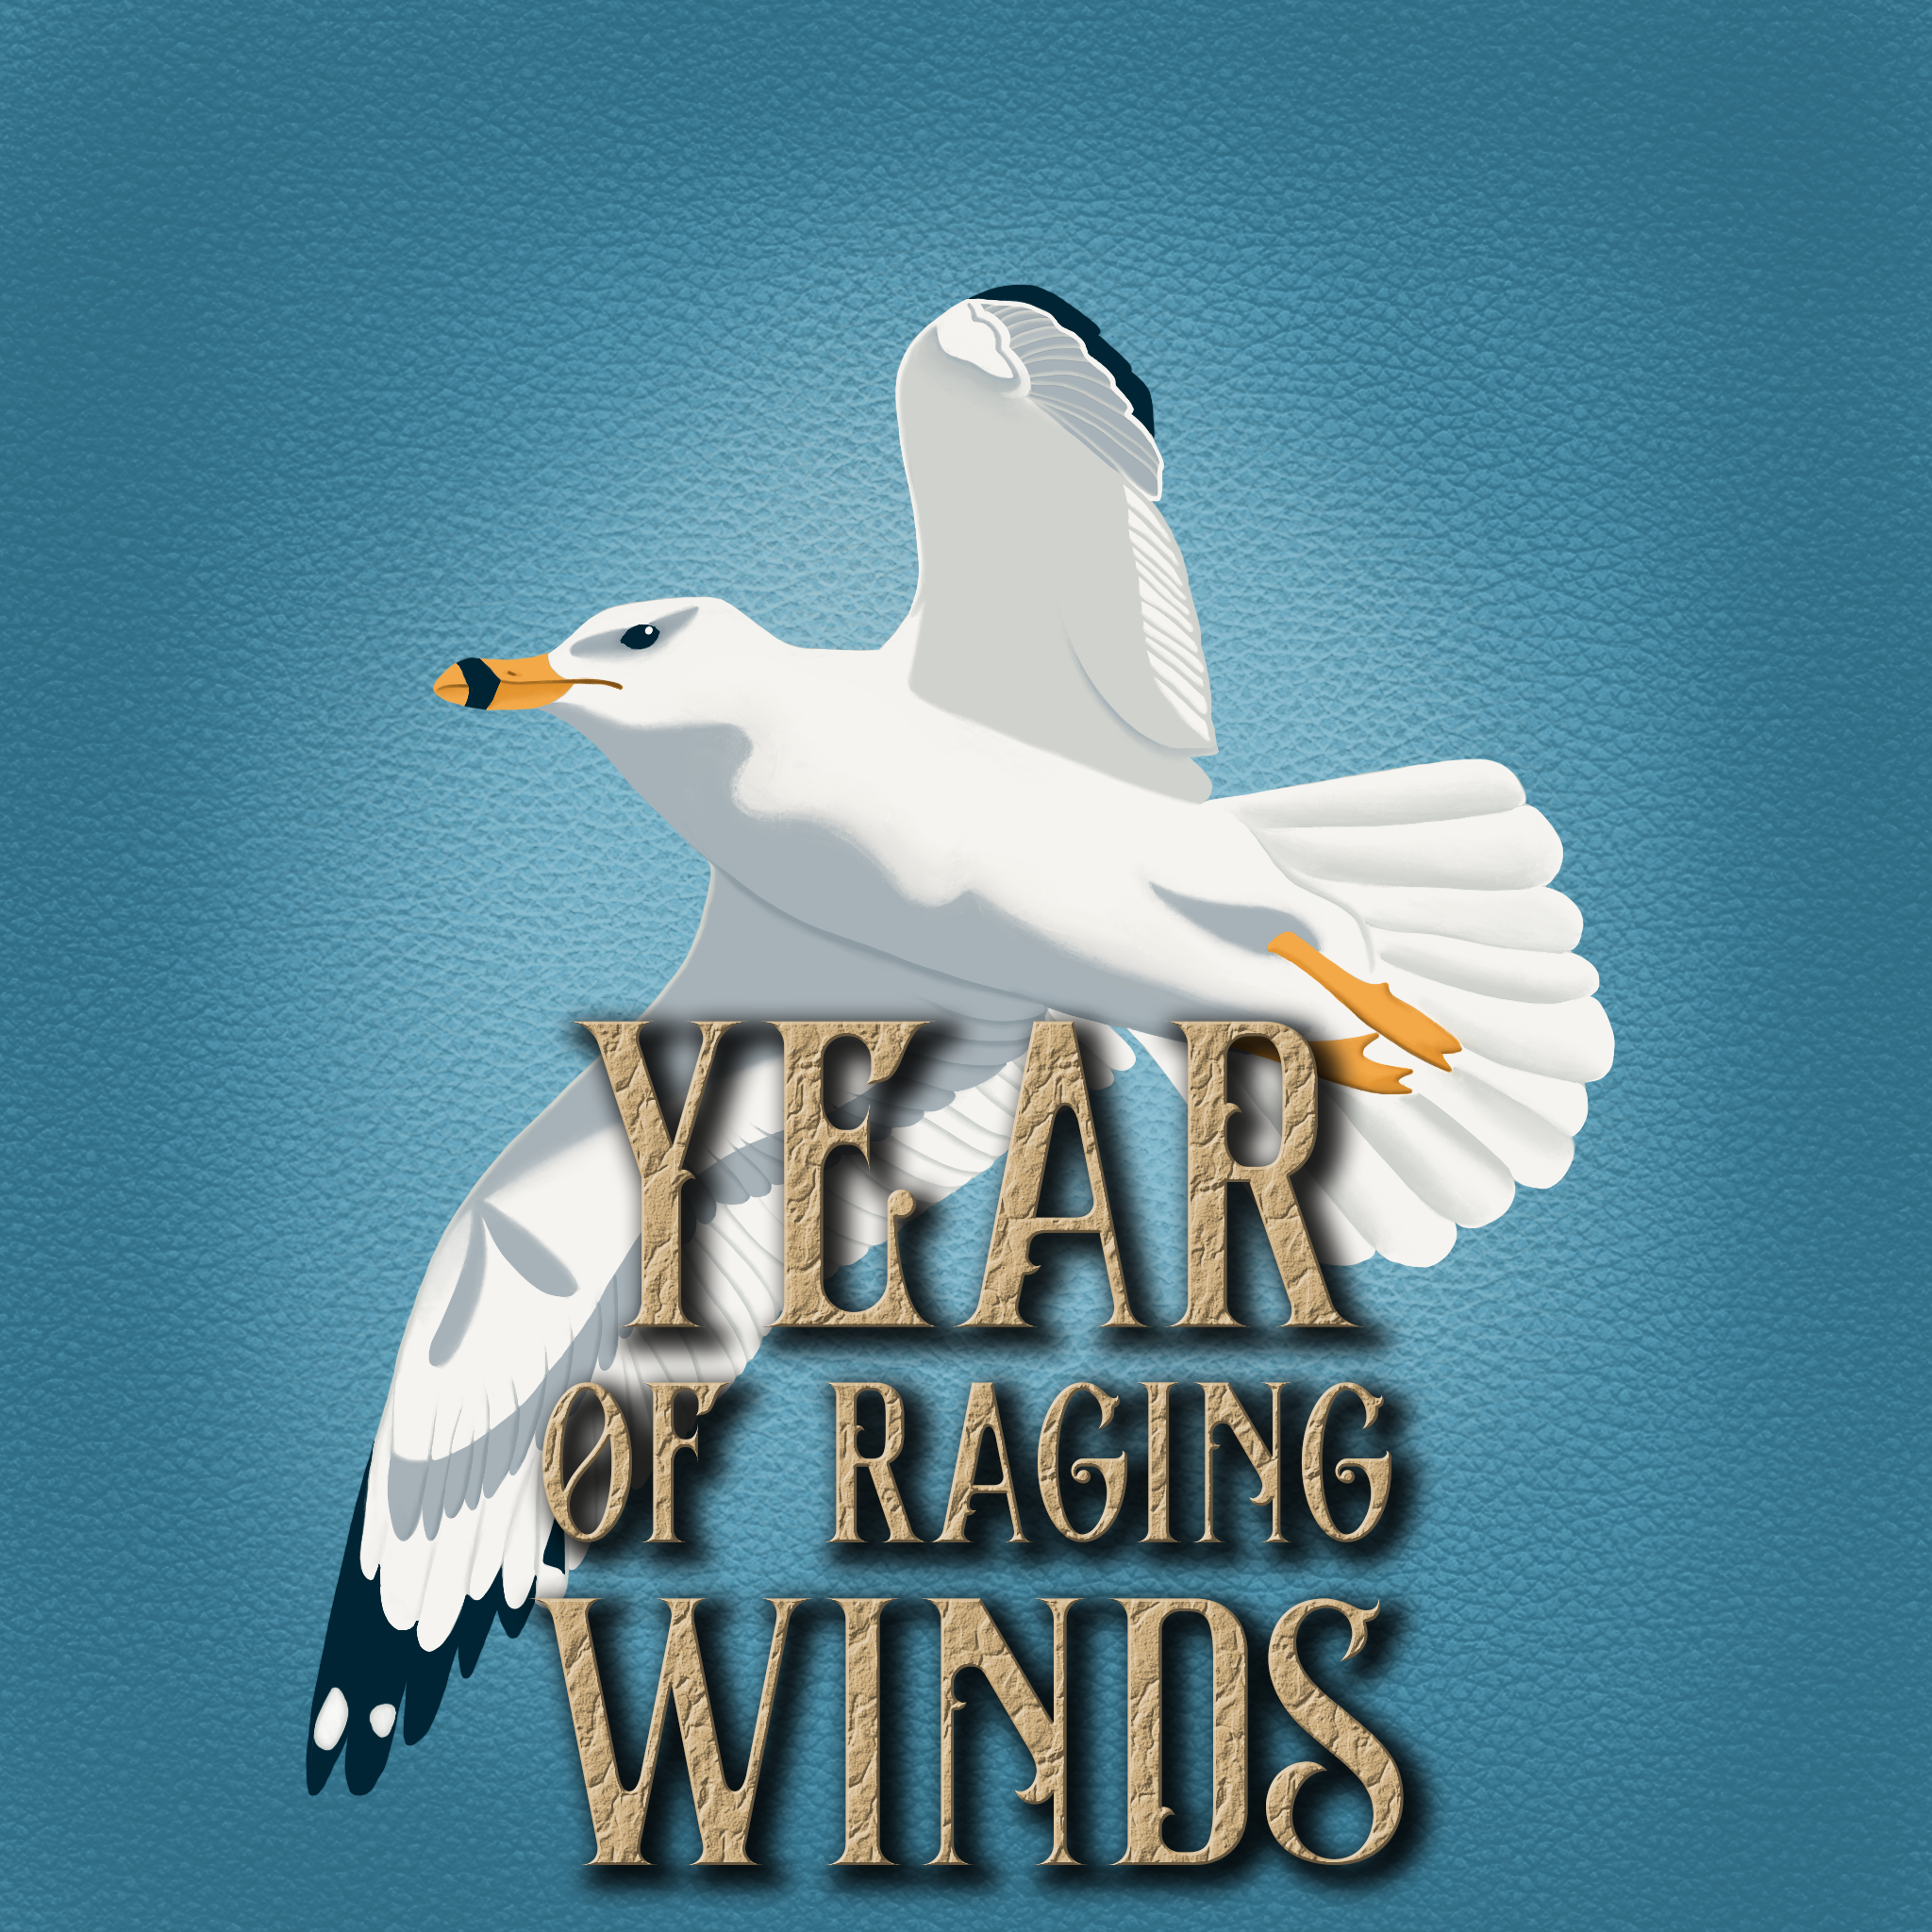 Year of Raging Winds Post-Mortem